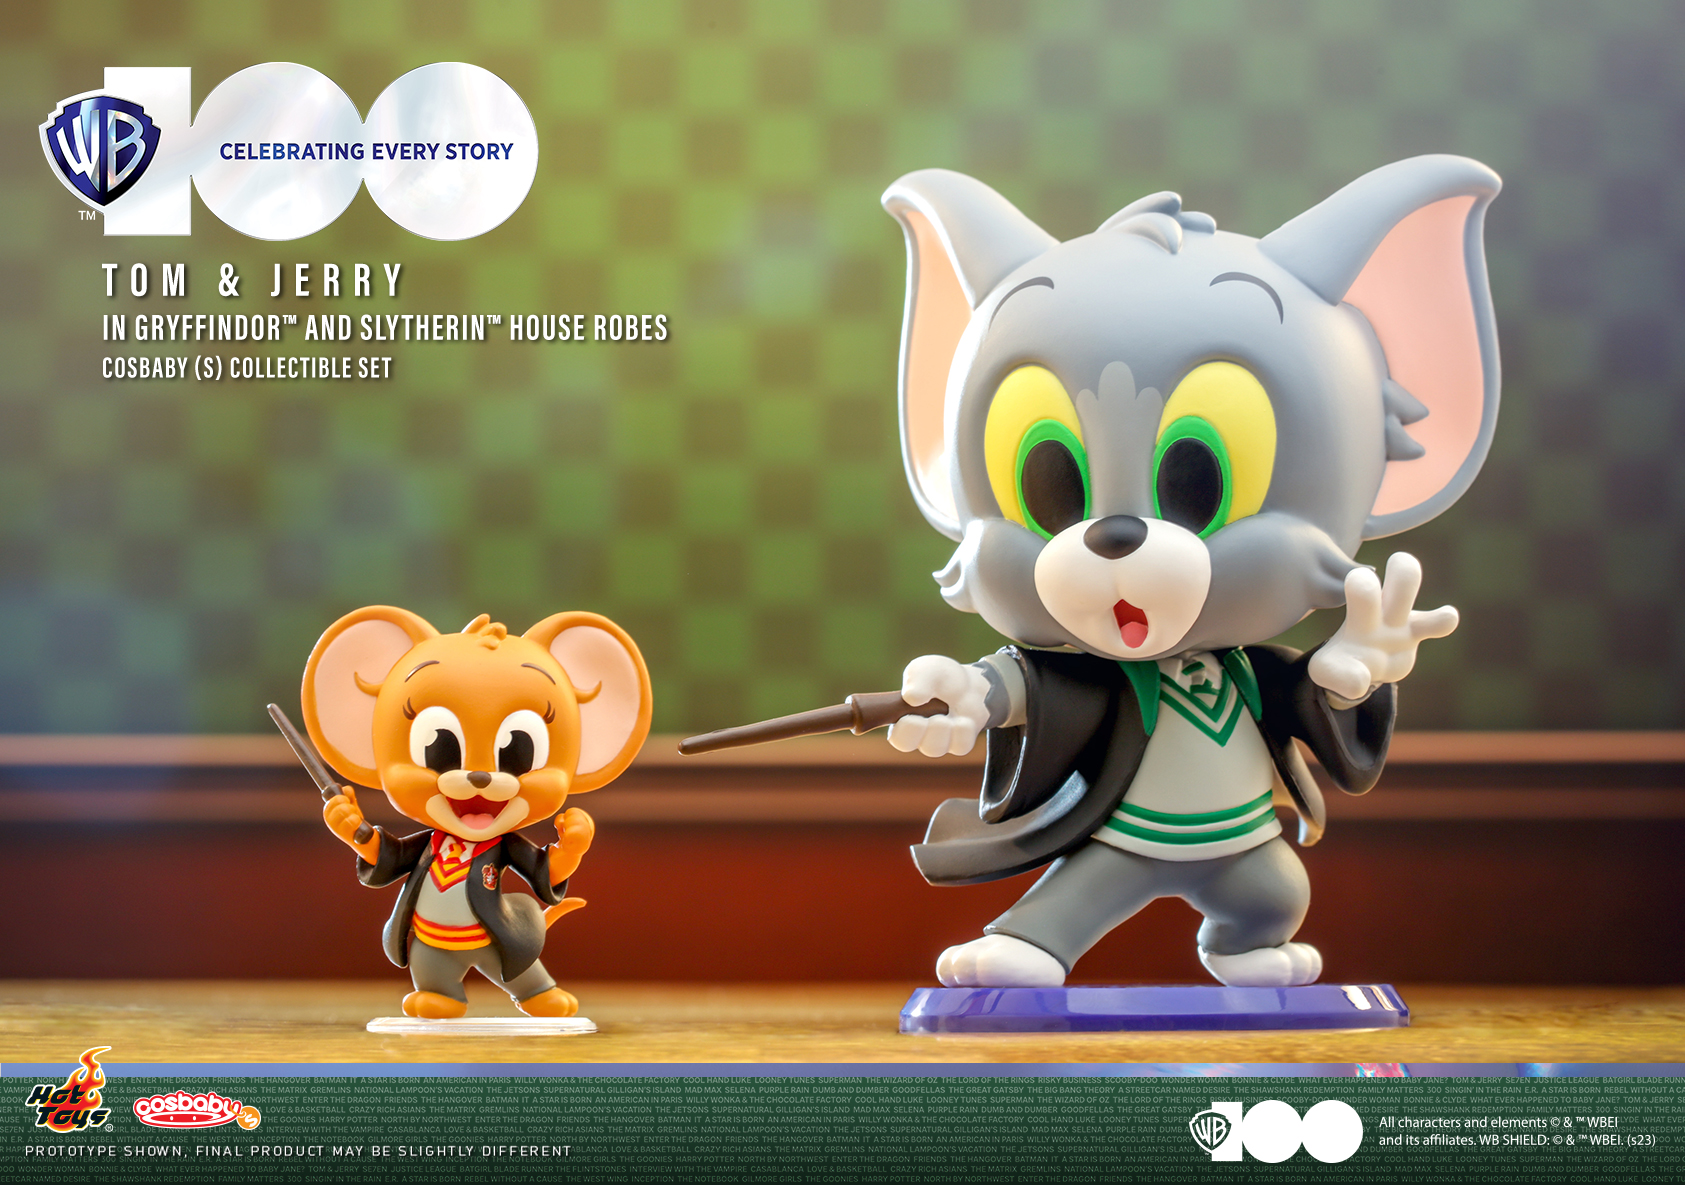 Hot Toys - WB100 - Tom & Jerry - Harry Potter Cosbaby_PR2